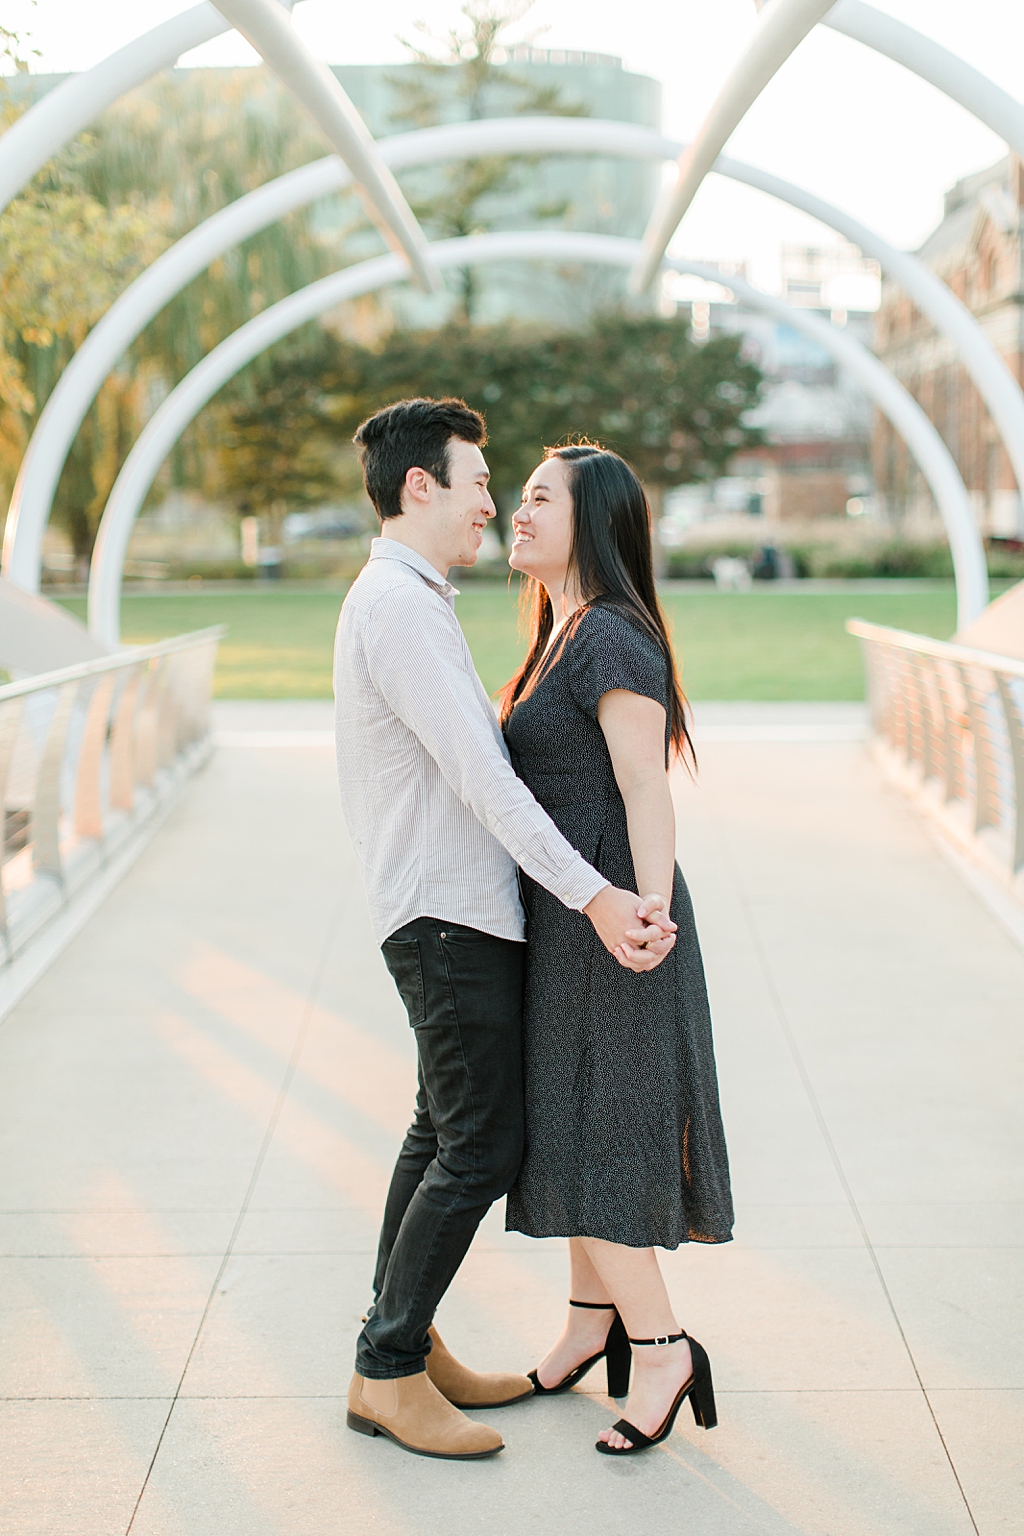 Becky_Collin_Navy_Yards_Park_The_Wharf_Washington_DC_Fall_Engagement_Session_AngelikaJohnsPhotography-8005.jpg